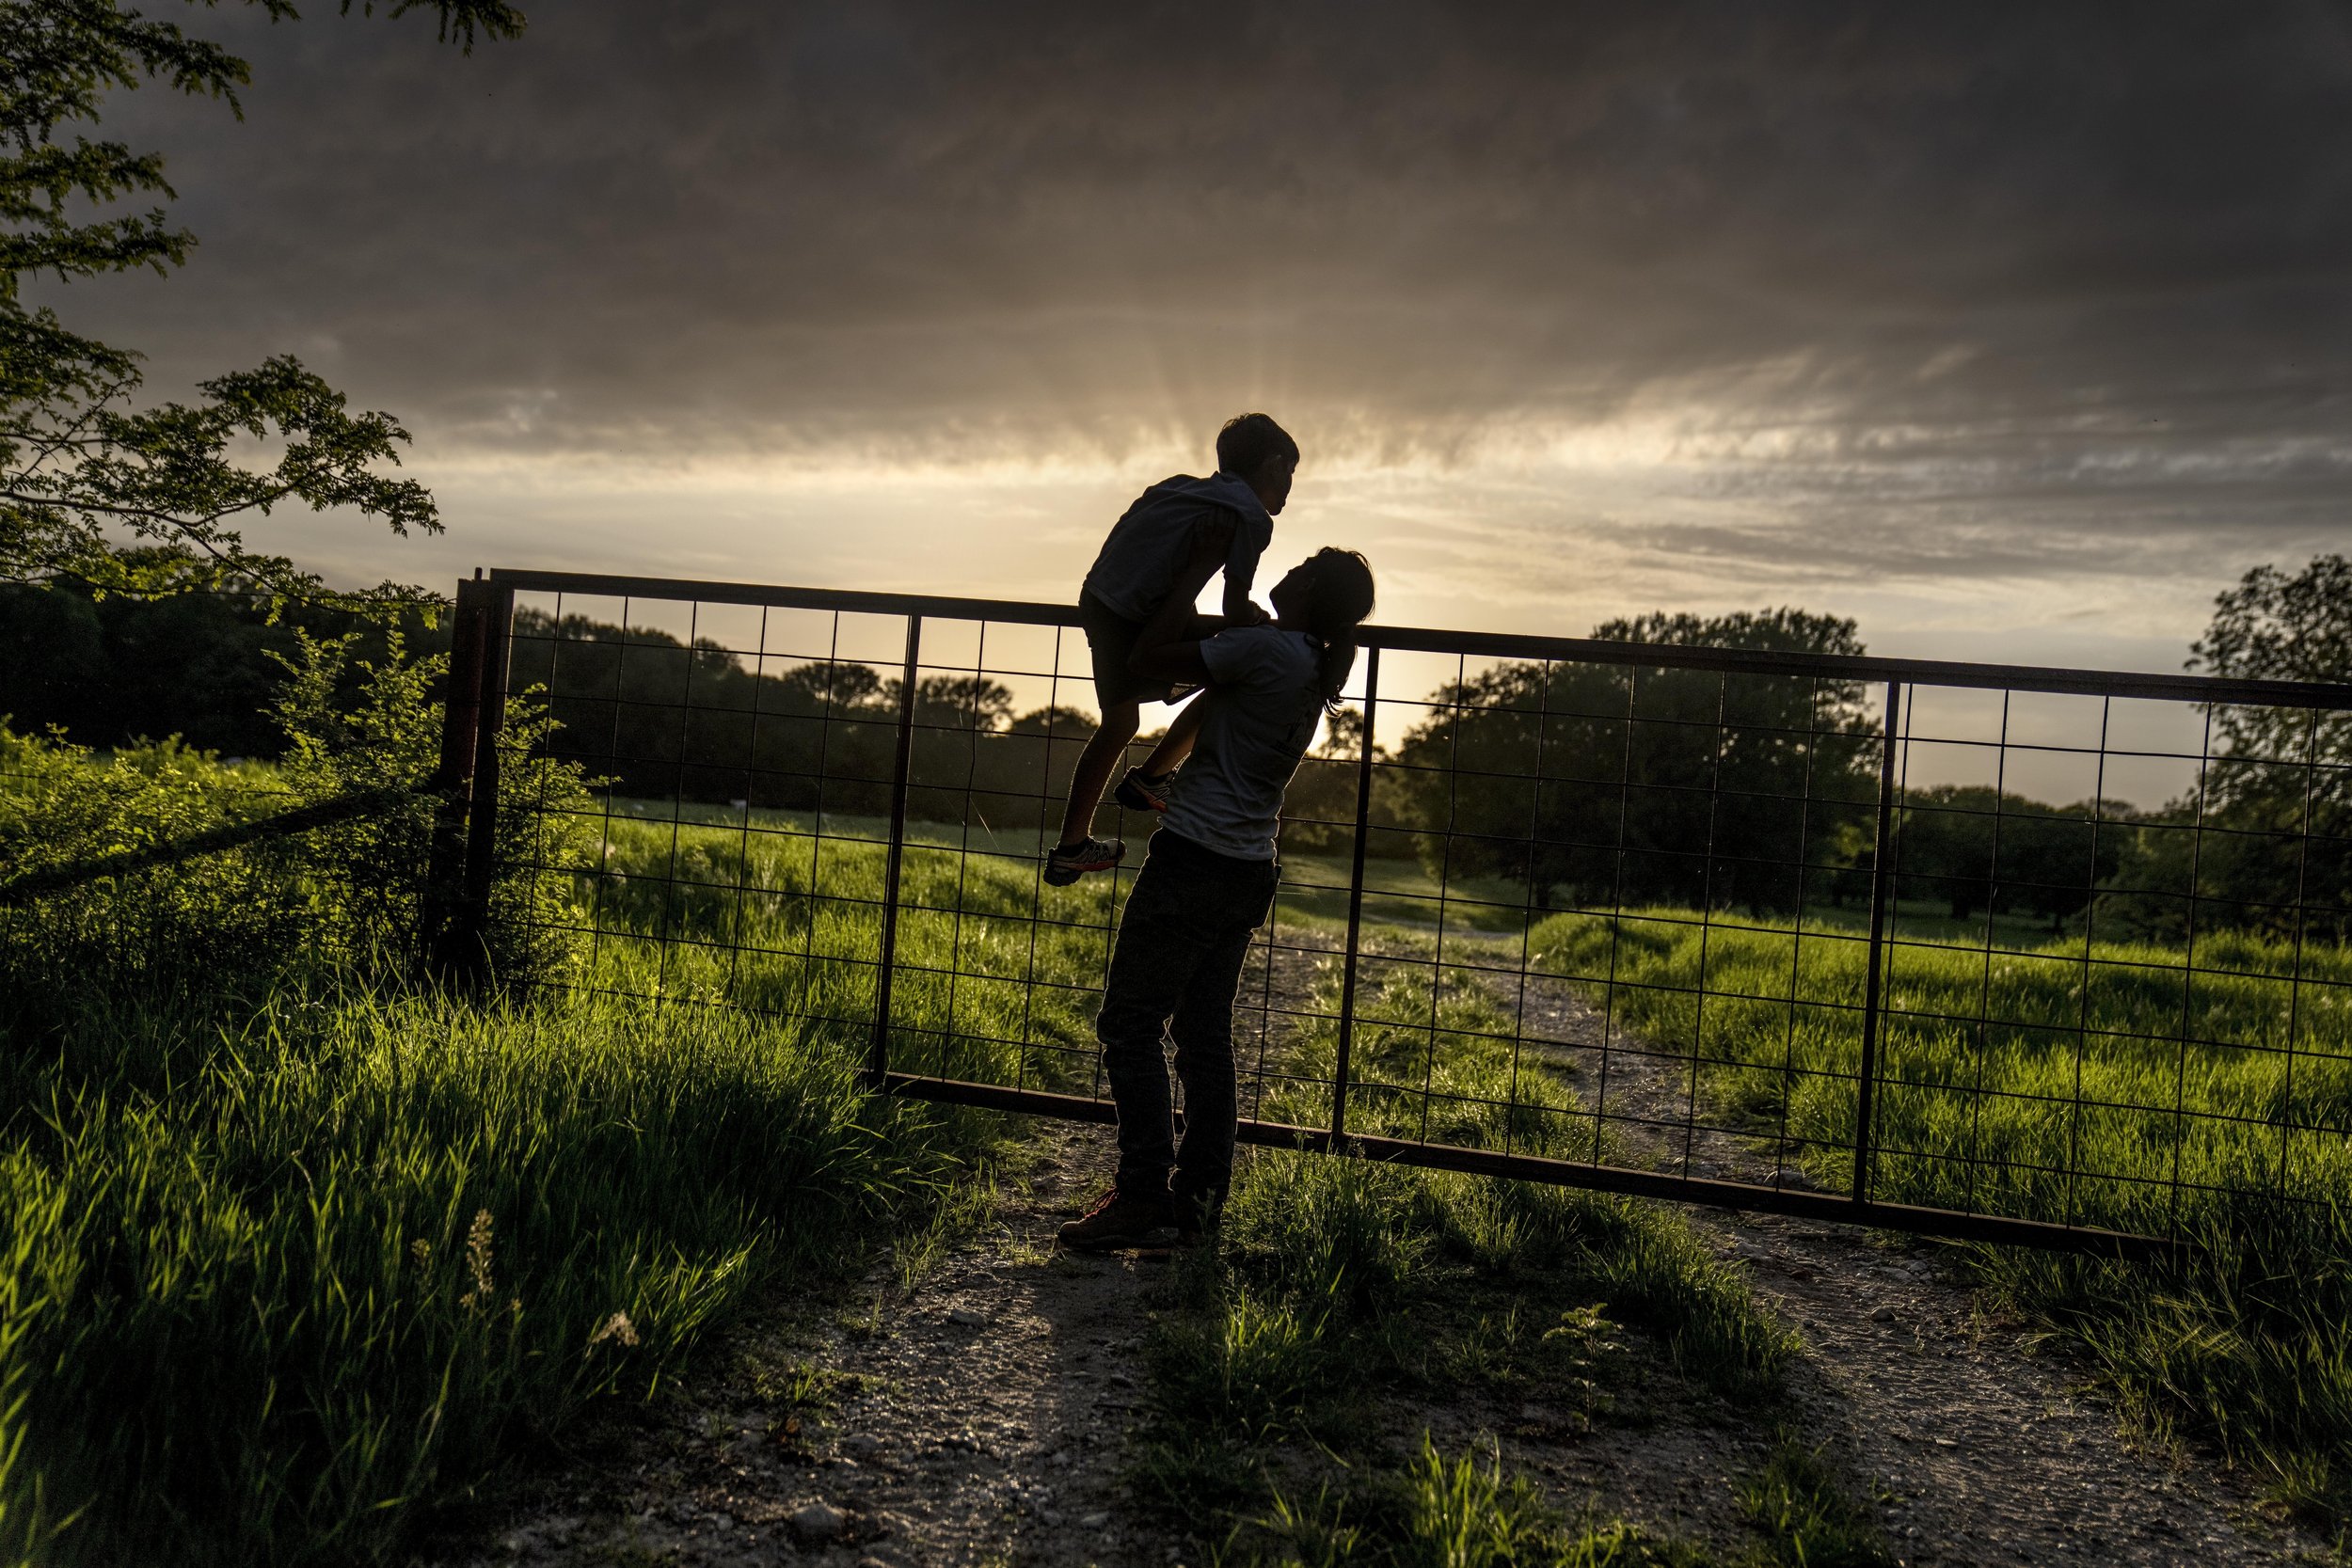  Meredith Ellis looks at cattle in the setting sun with her 6-year-old son, GC, on their ranch in Rosston, Texas, on April 20, 2023. Ellis has seen how global warming is altering her land. She calls it an "existential crisis," the backdrop to the end